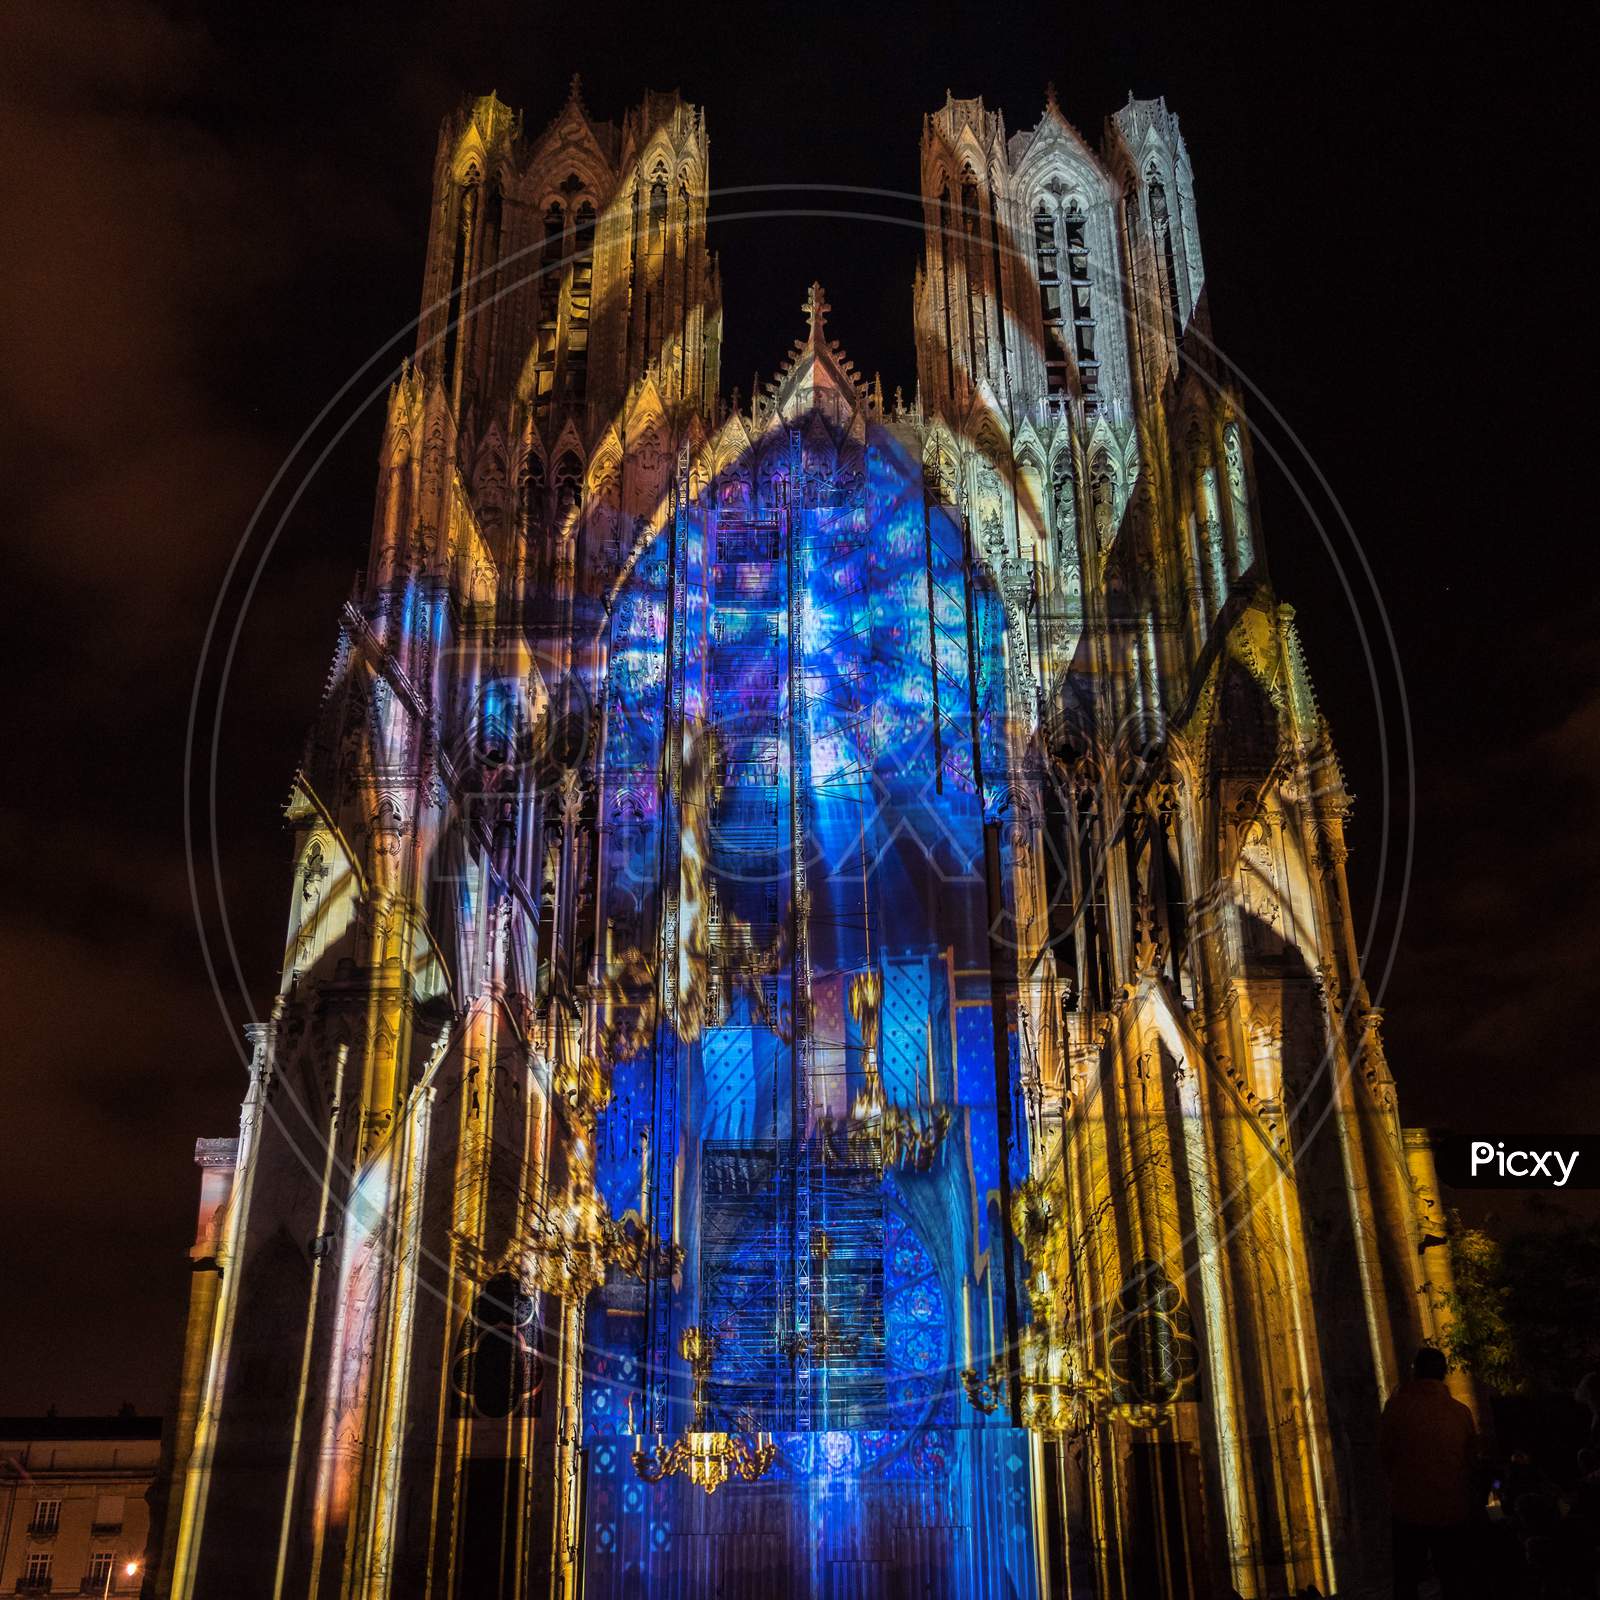 Light Show At Reims Cathedral In Reims France On September 12, 2015